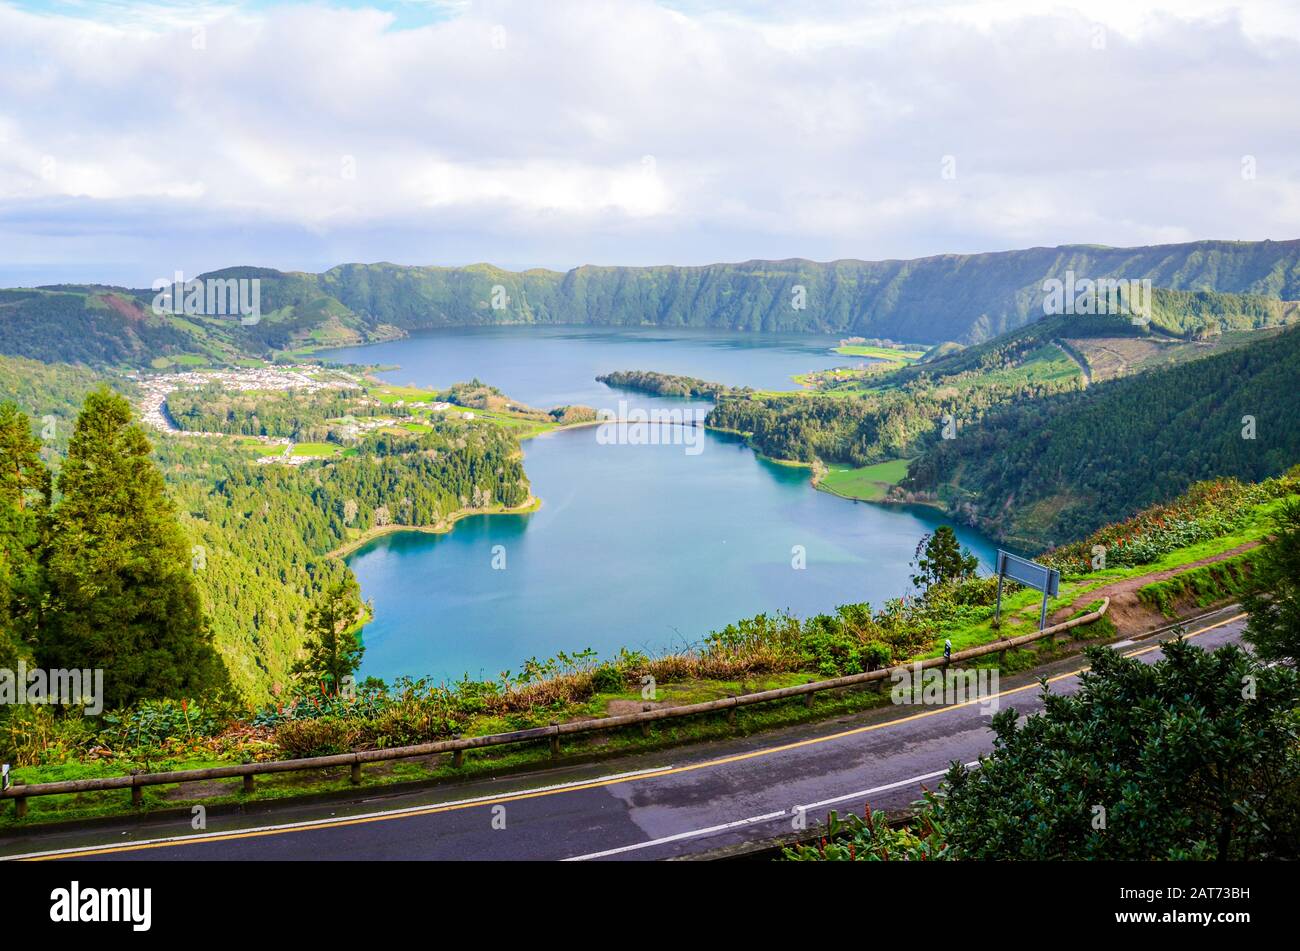 Amazing view of the lakes Sete Cidades photographed from the Vista do Rei Viewpoint in San Miguel Island, Azores, Portugal. Blue volcanic lake surrounded by green forest. Road in the foreground. Stock Photo